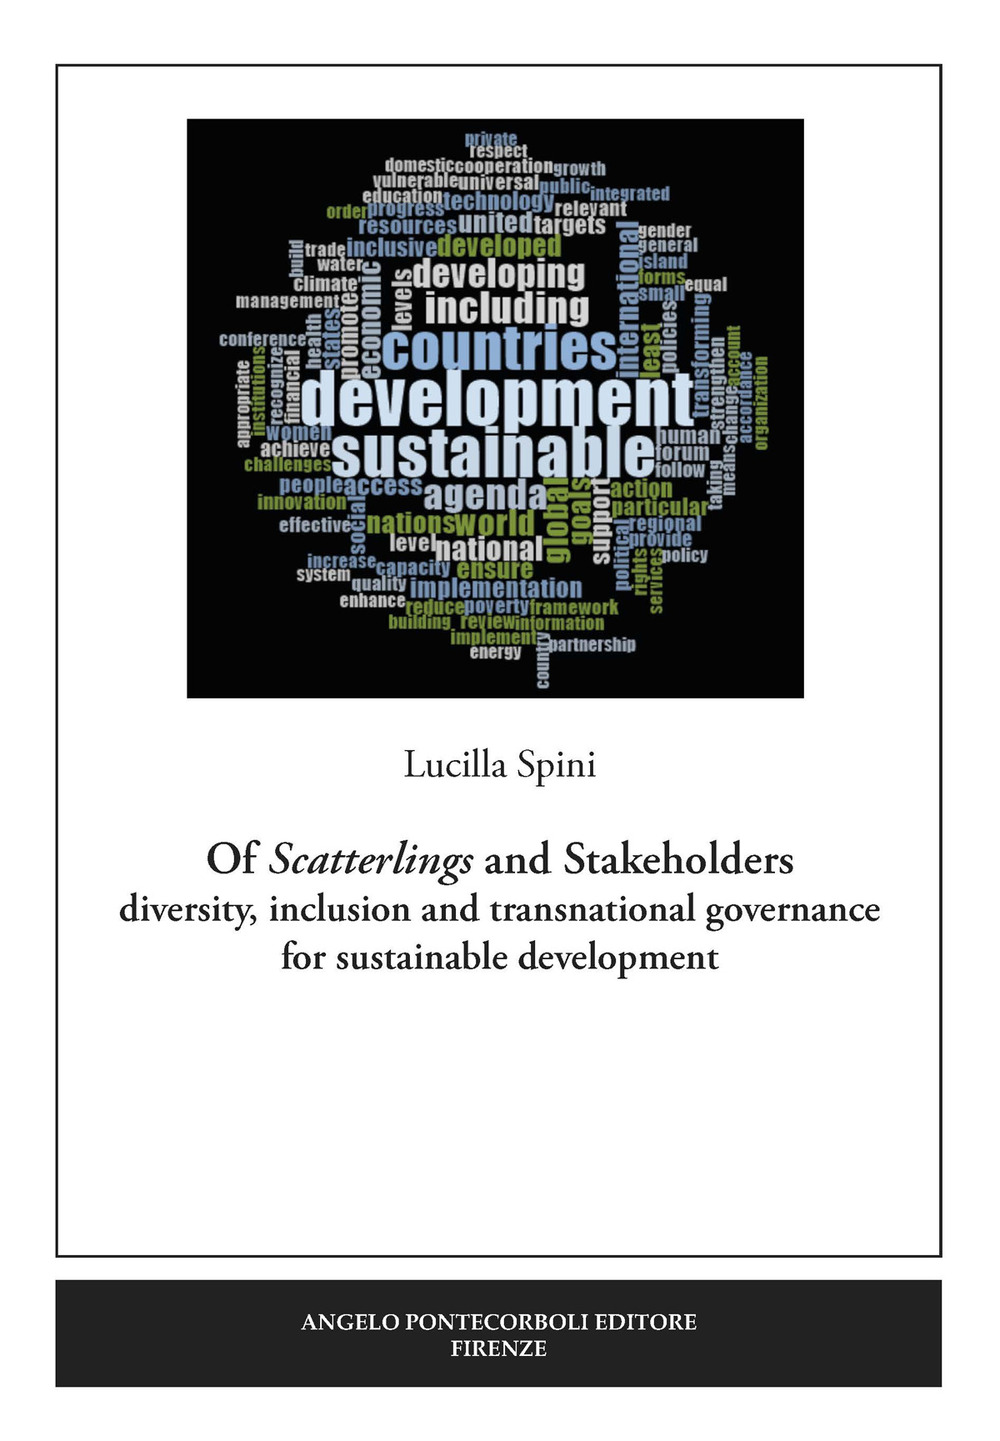 Of Scatterlings and Stakeholders. Diversity, inclusion and transnational governance for sustainable development. Nuova ediz.